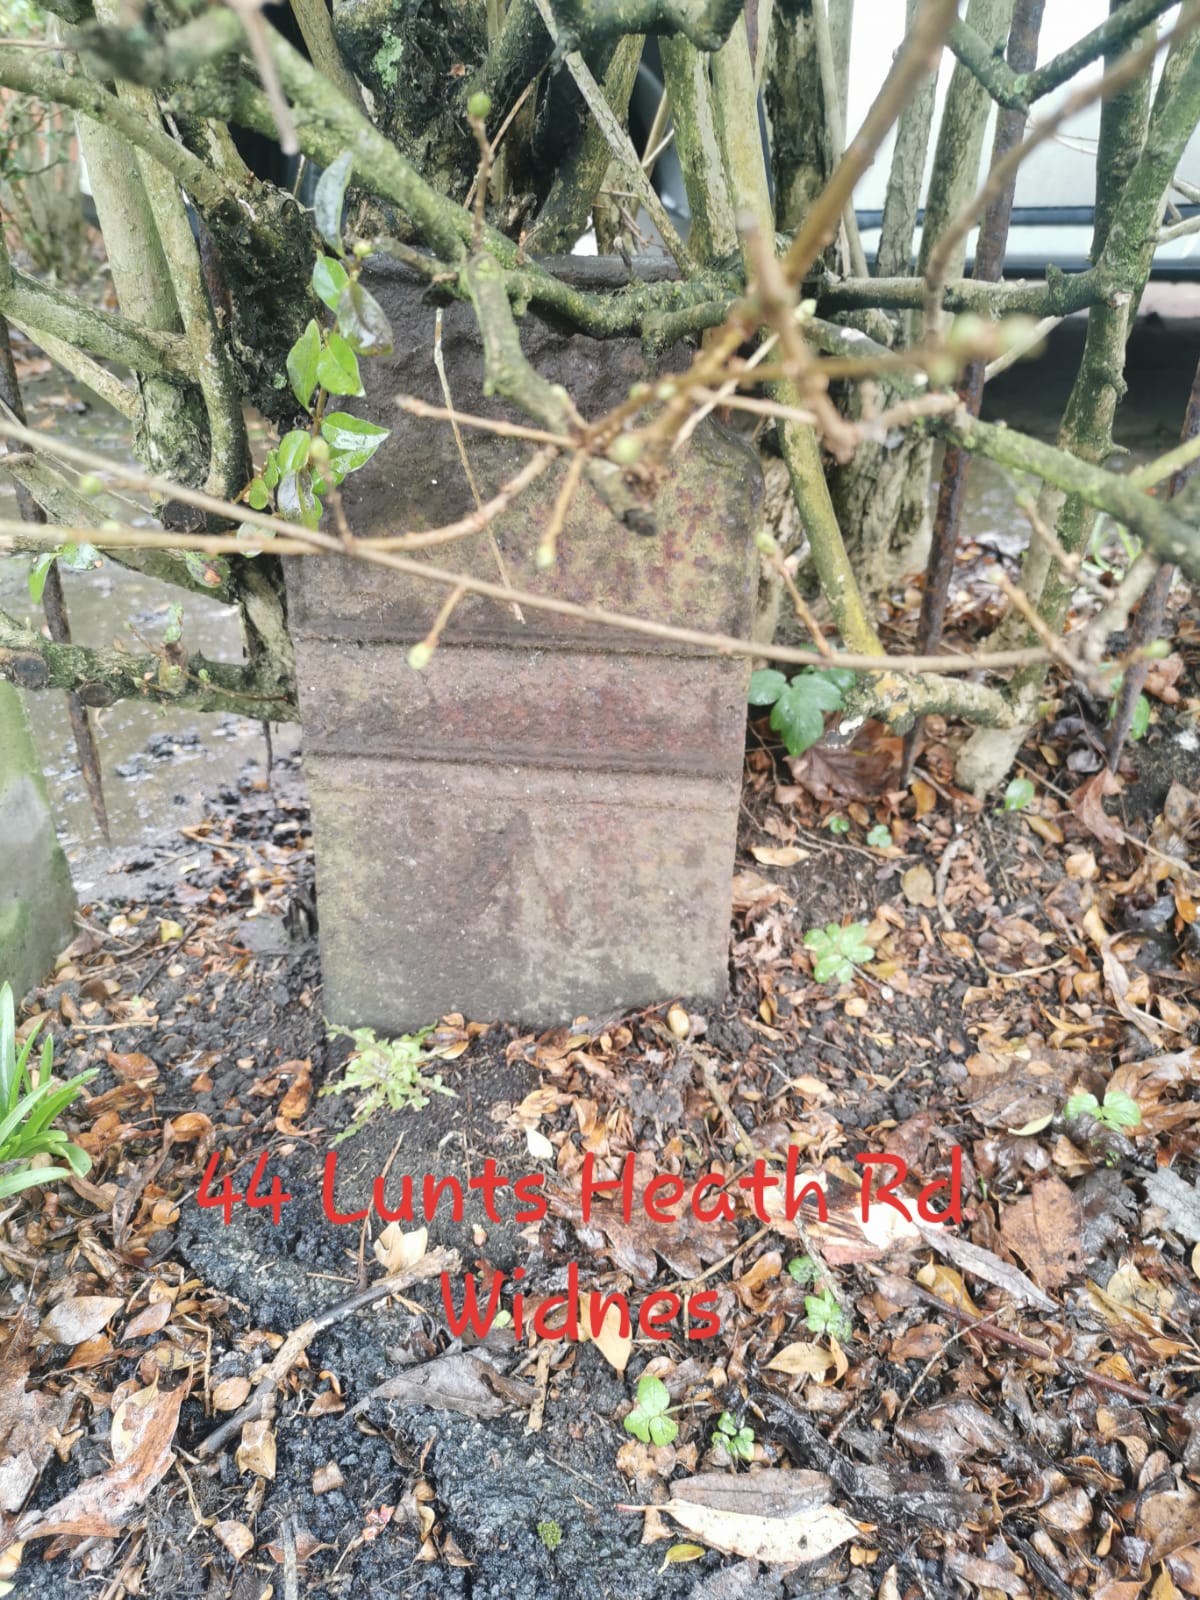 Telegraph cable marker post at 44 Lunts Heath Road, Widnes by Jan Gibbons 